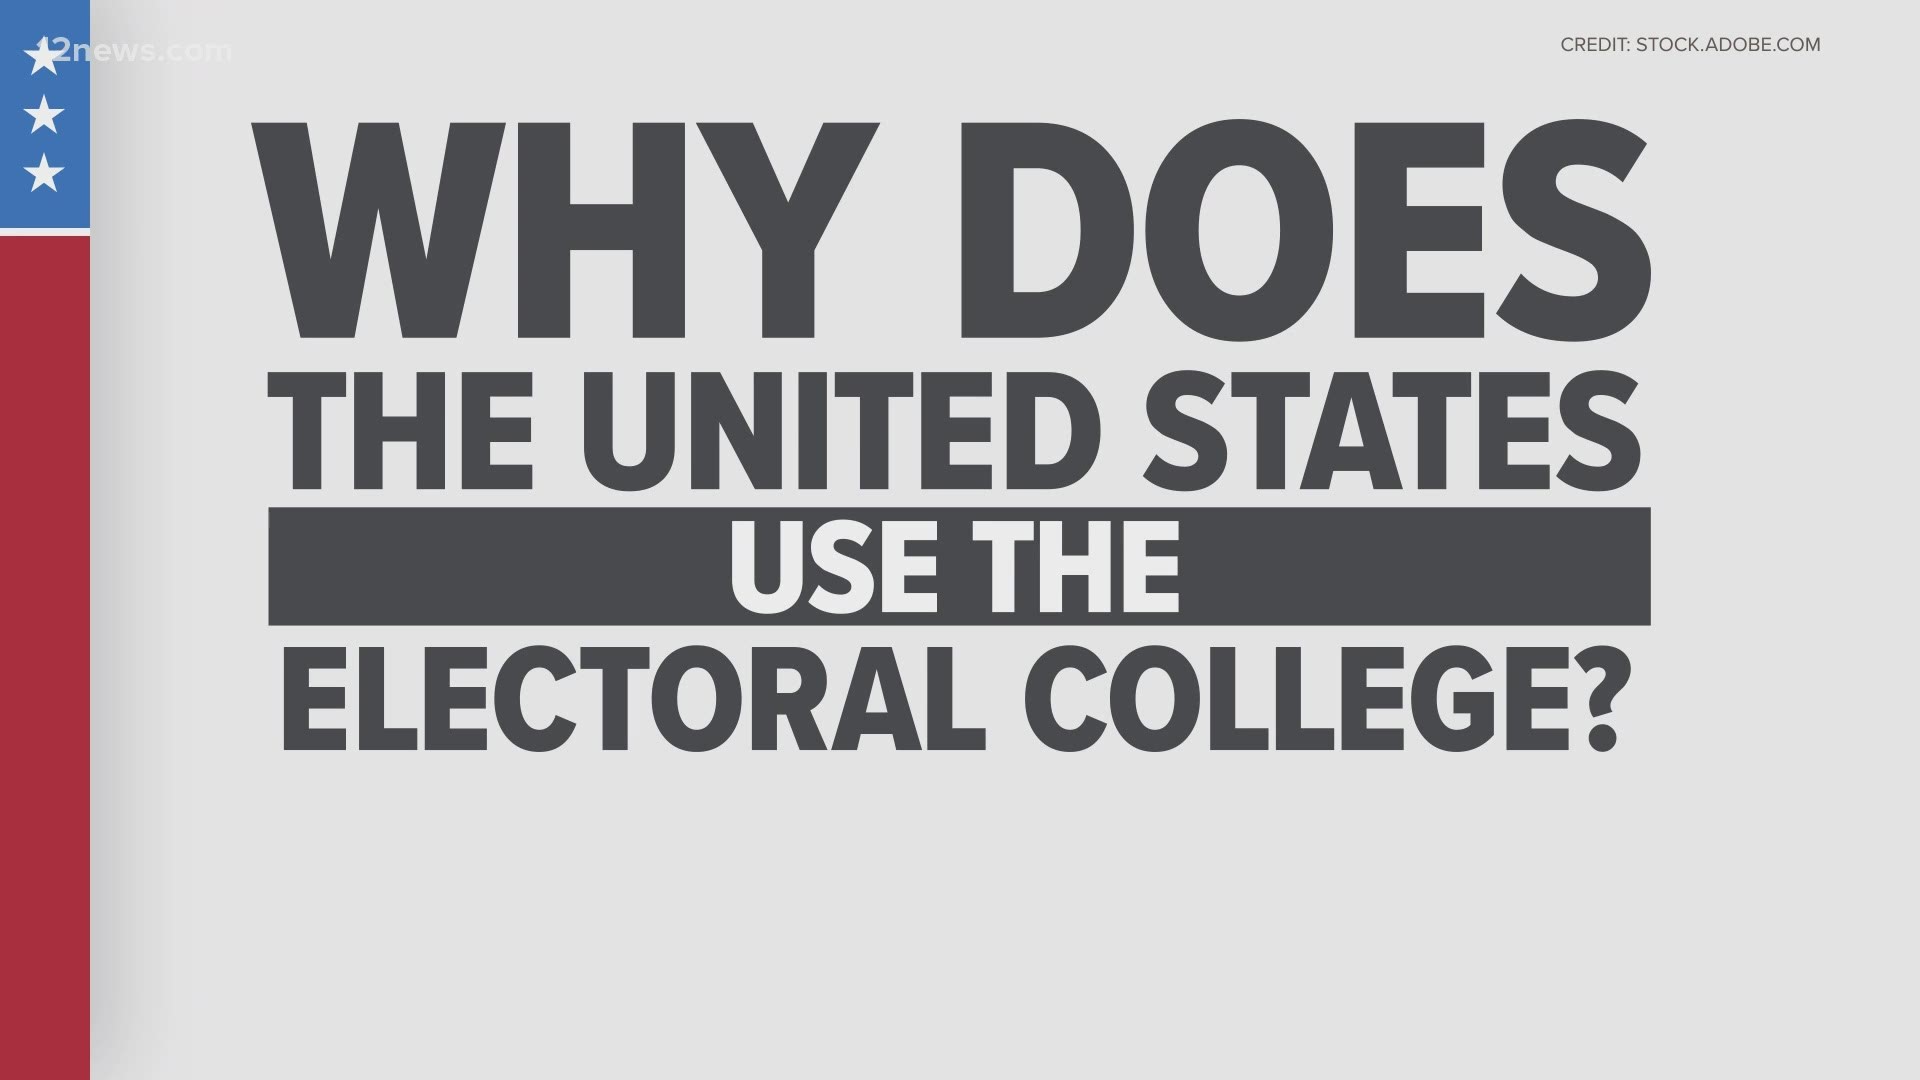 If you think the electoral college isn't a perfect system, neither did the people who came up with it.